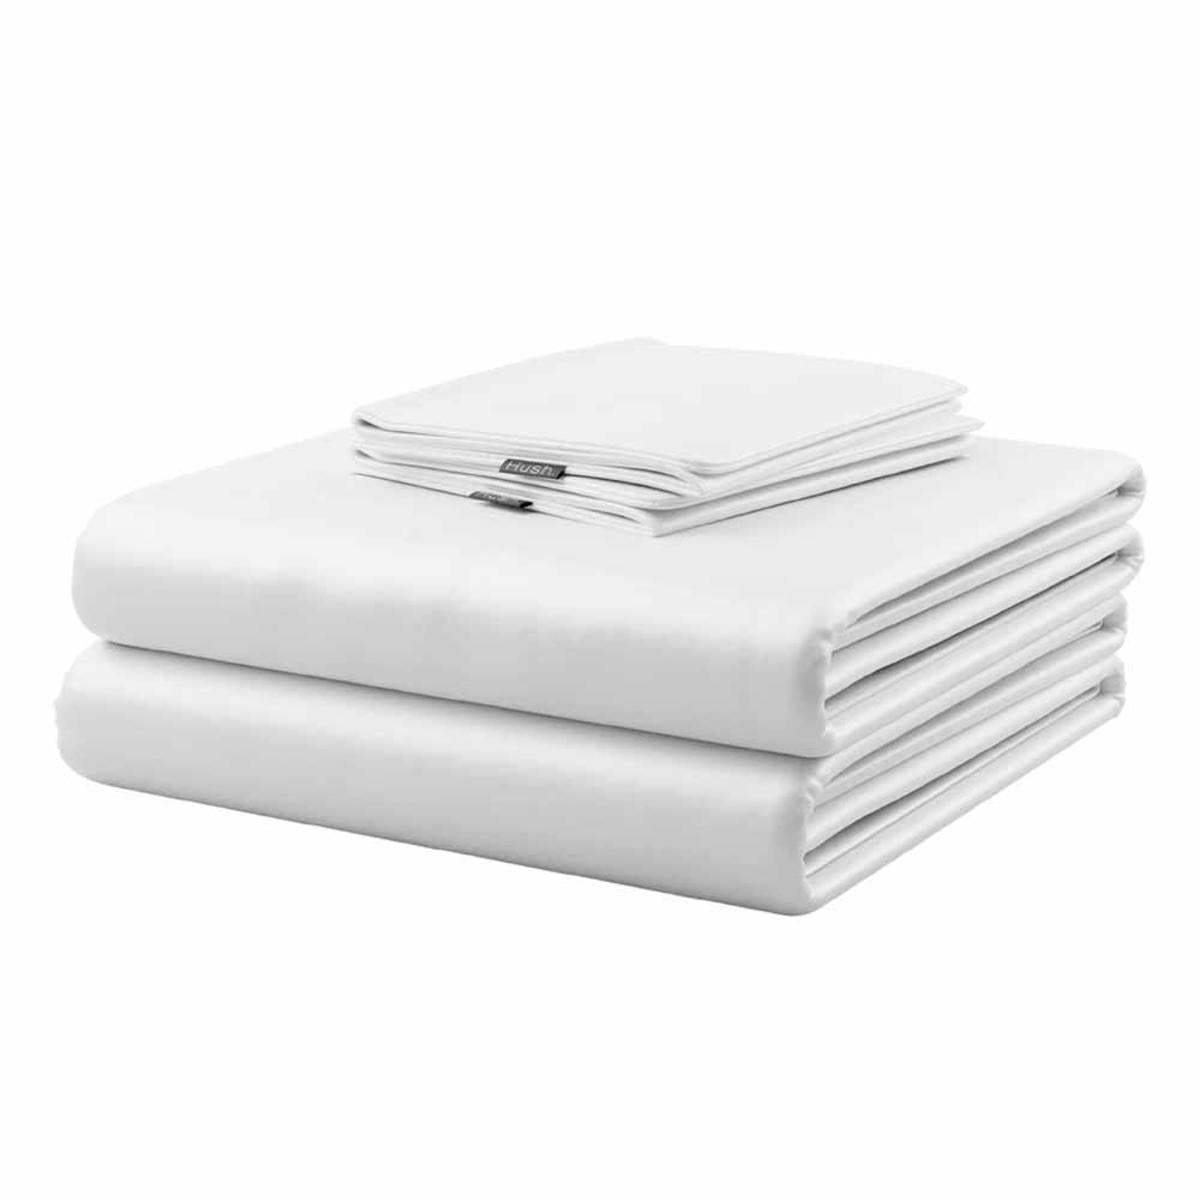 Hush Iced Cooling Sheet and Pillowcase Set - Twin